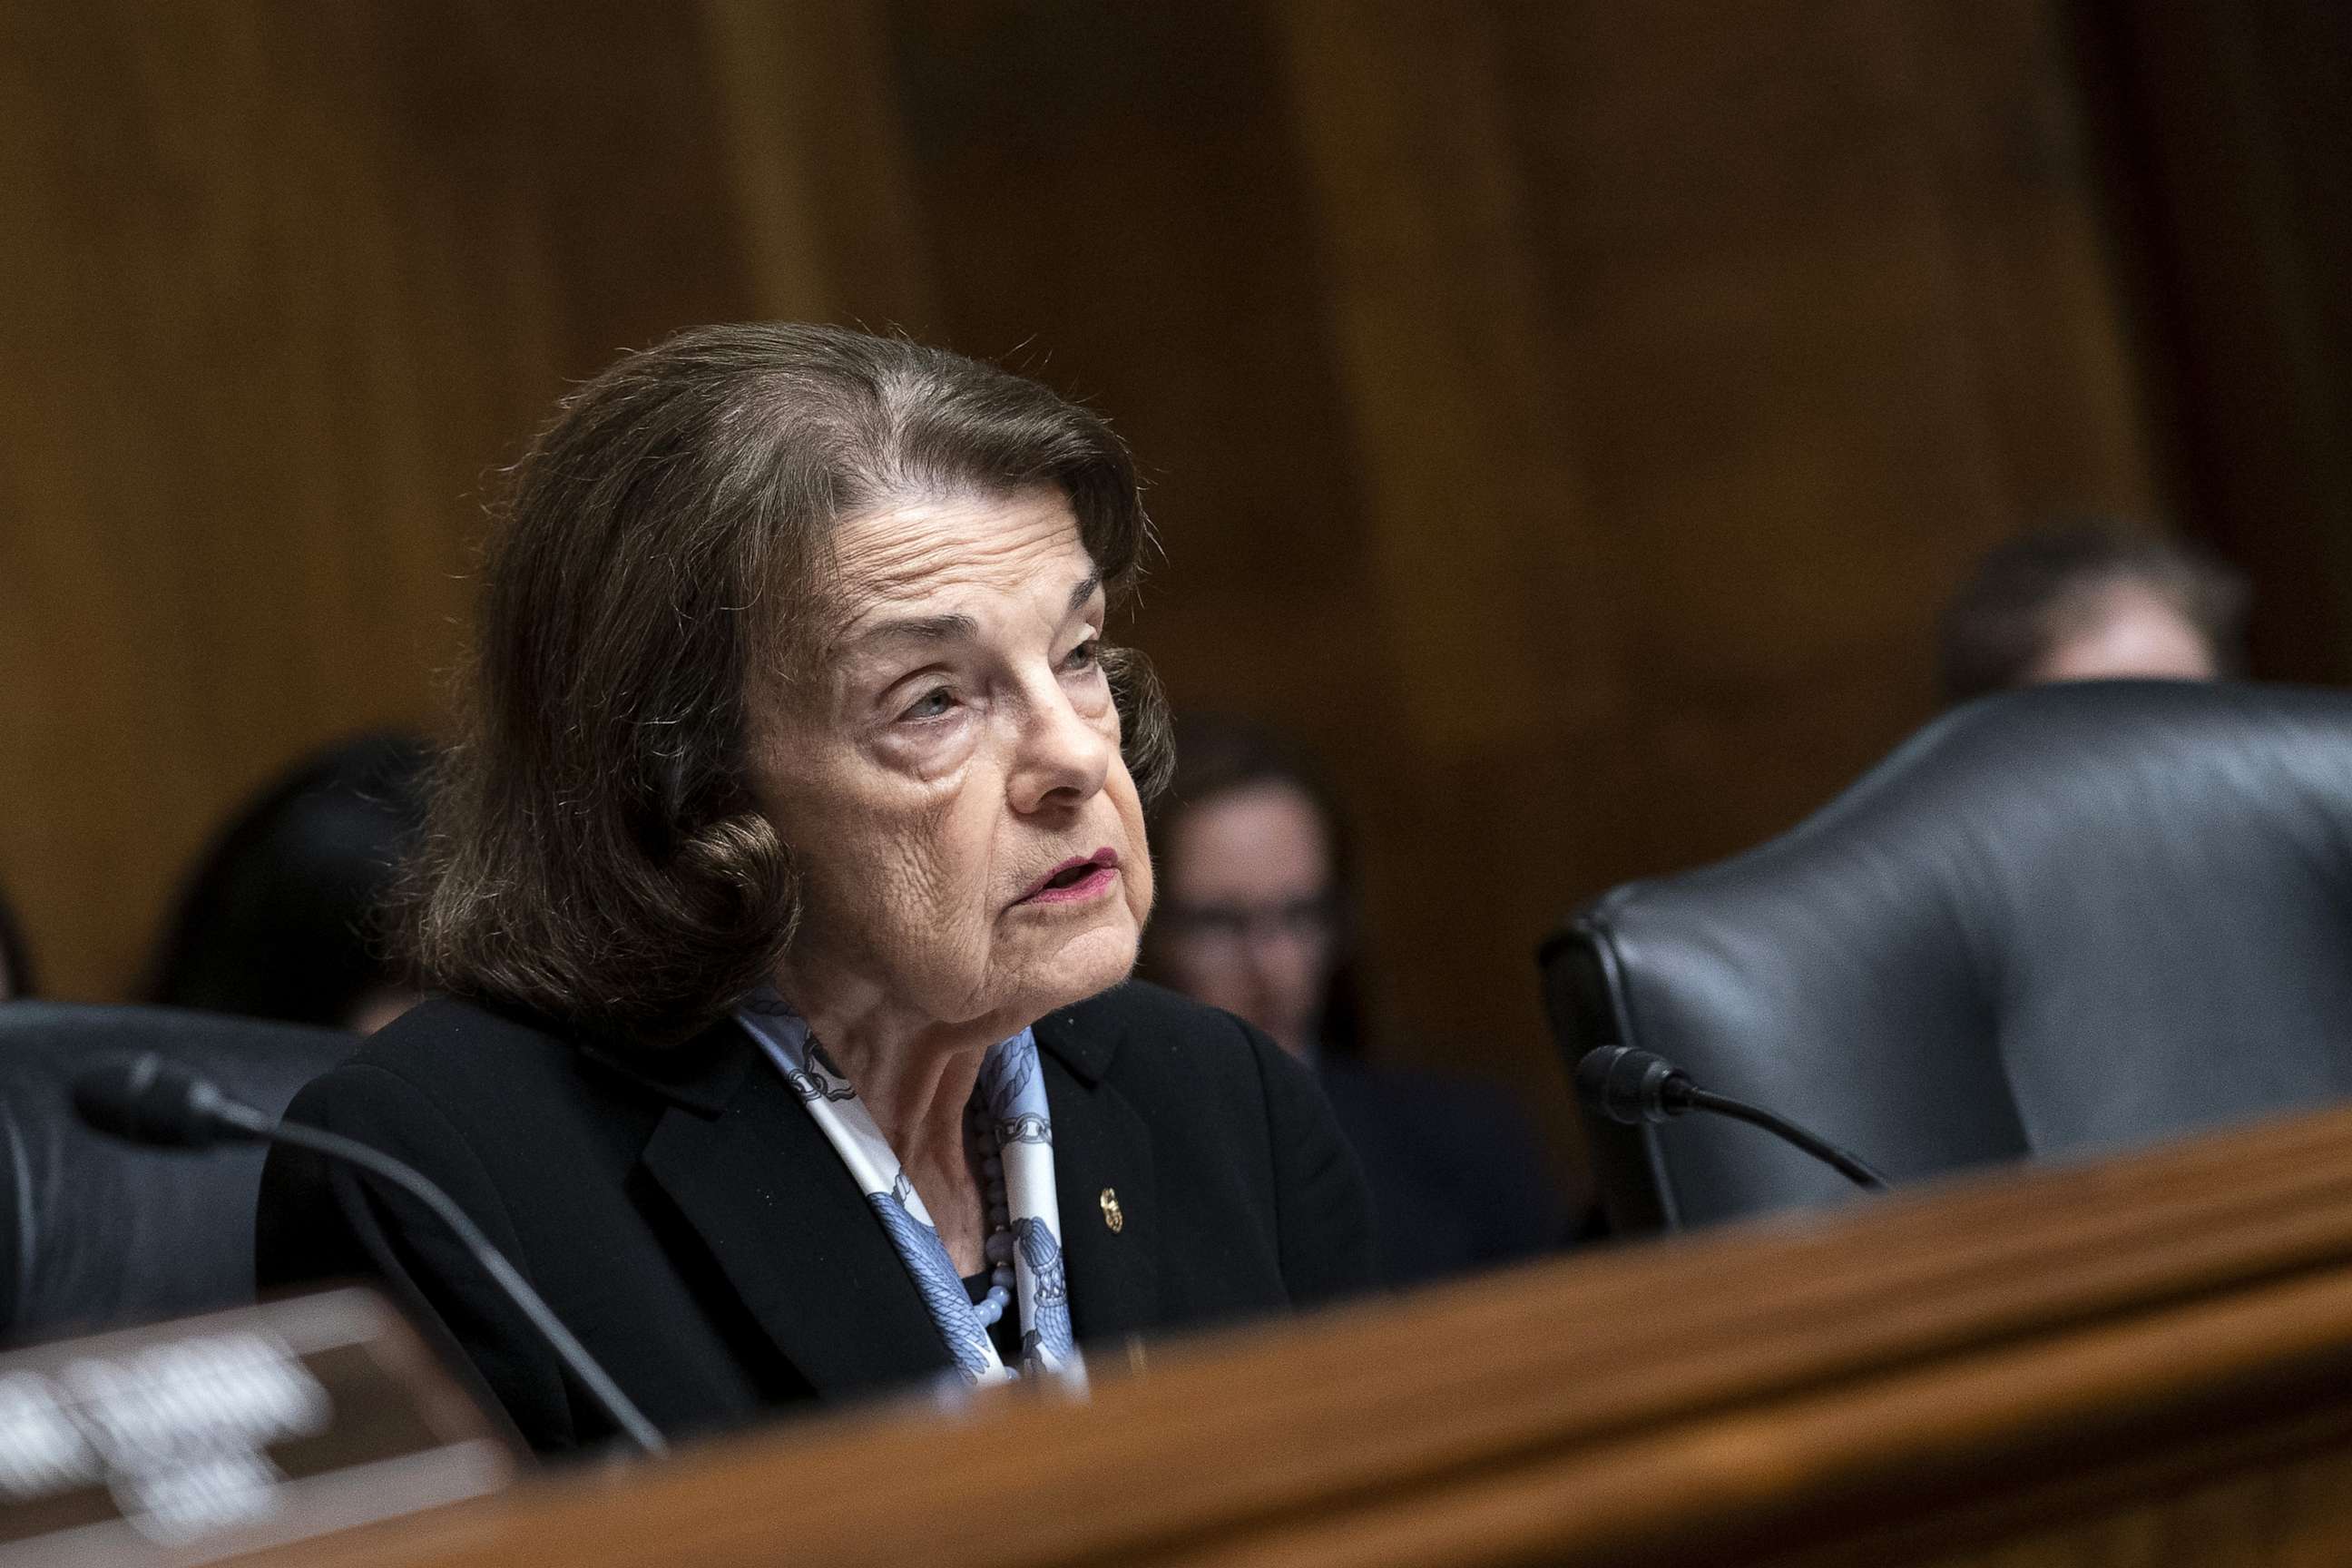 PHOTO: Senator Dianne Feinstein speaks during the confirmation hearing for Steven Dettelbach, director of the Bureau of Alcohol, Tobacco, Firearms and Explosives (ATF) nominee for President Joe Biden, in Washington, D.C., May 25, 2022.